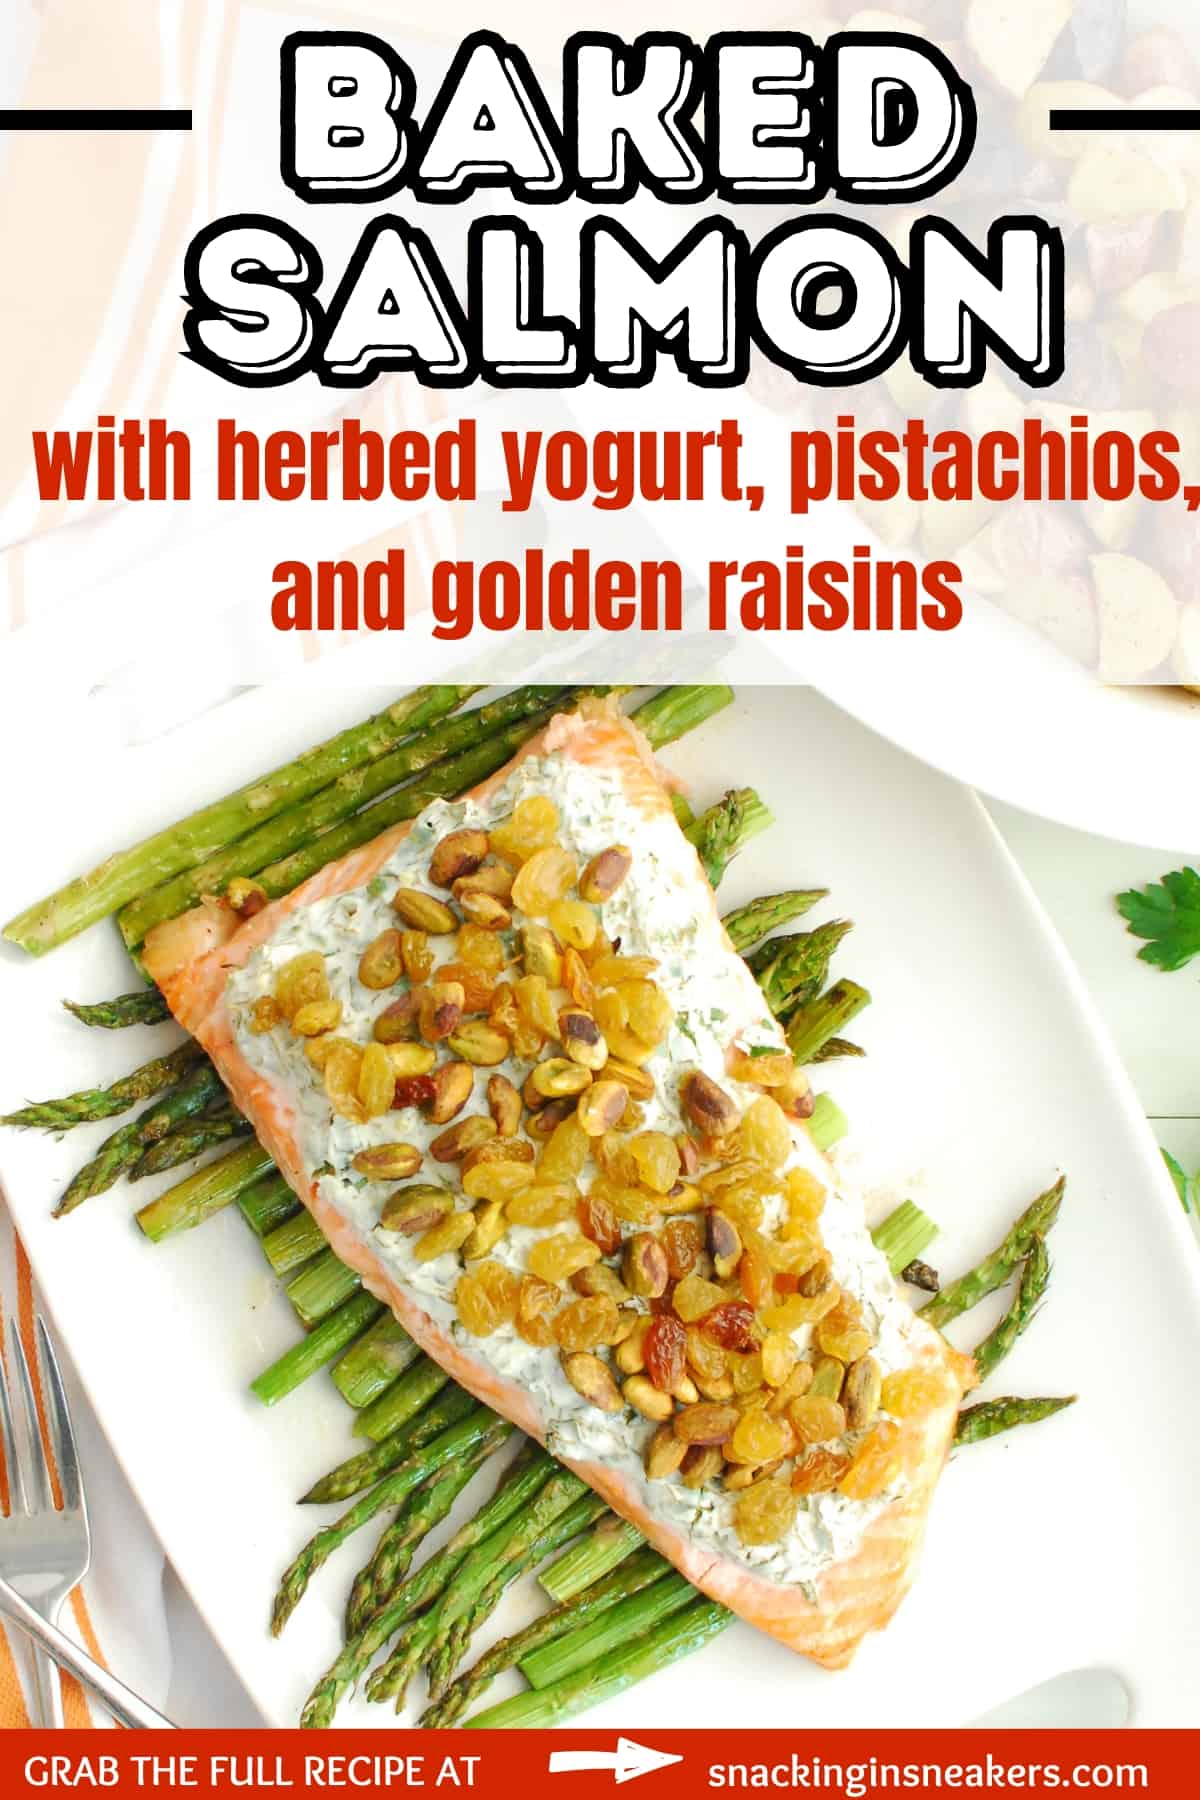 A baked salmon fillet with herbed yogurt sitting on roasted asparagus on a white platter, with a text overlay with the name of the recipe.